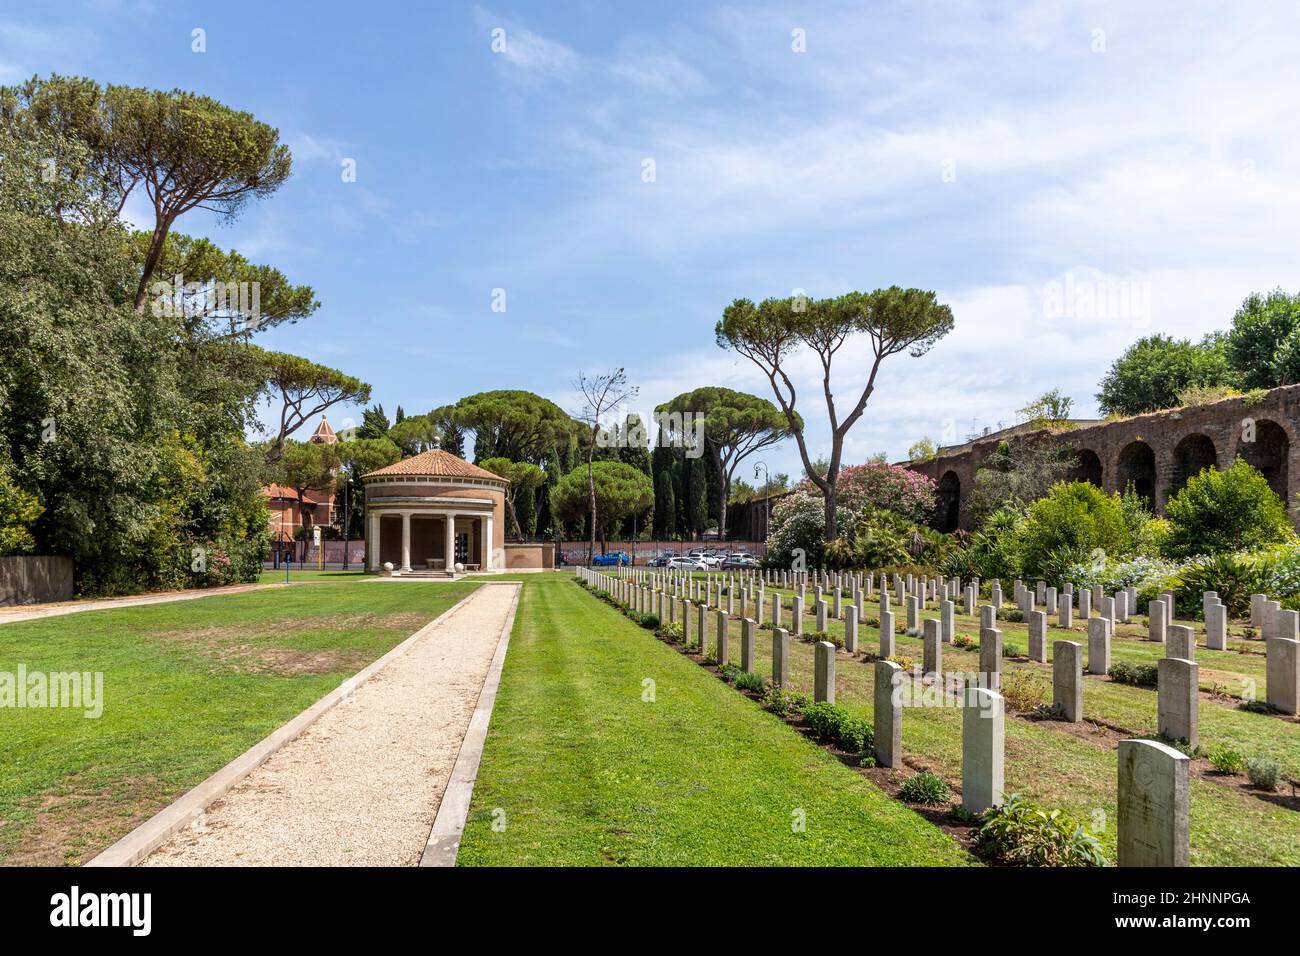 Rome War Cemetery of commonwealth war graves. Soldiers who are fallen in WW2 in period of 1939 - 1945 Stock Photo